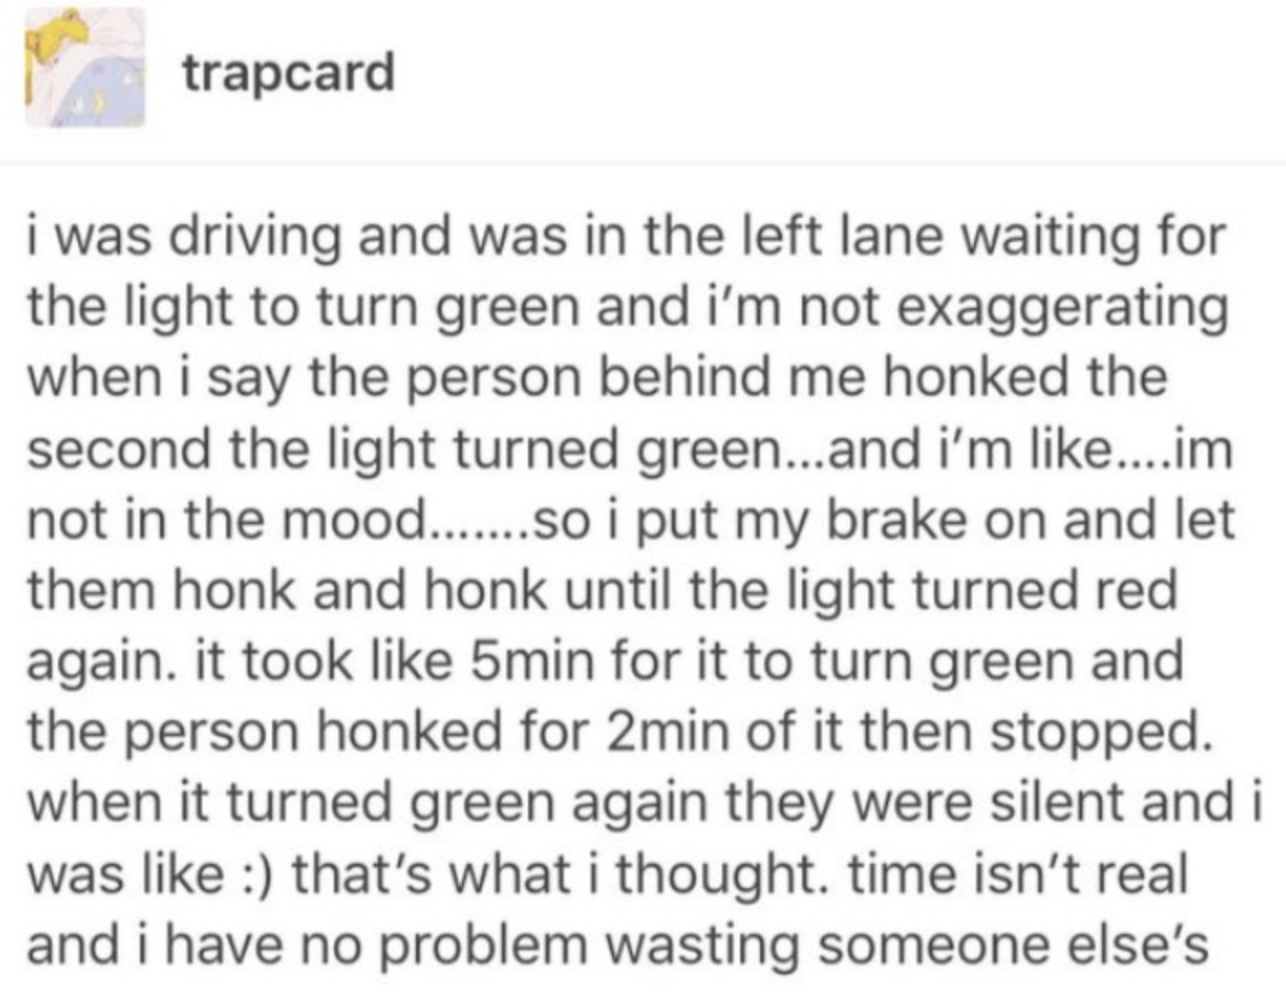 tumblr post about someone purposely waiting at a green light